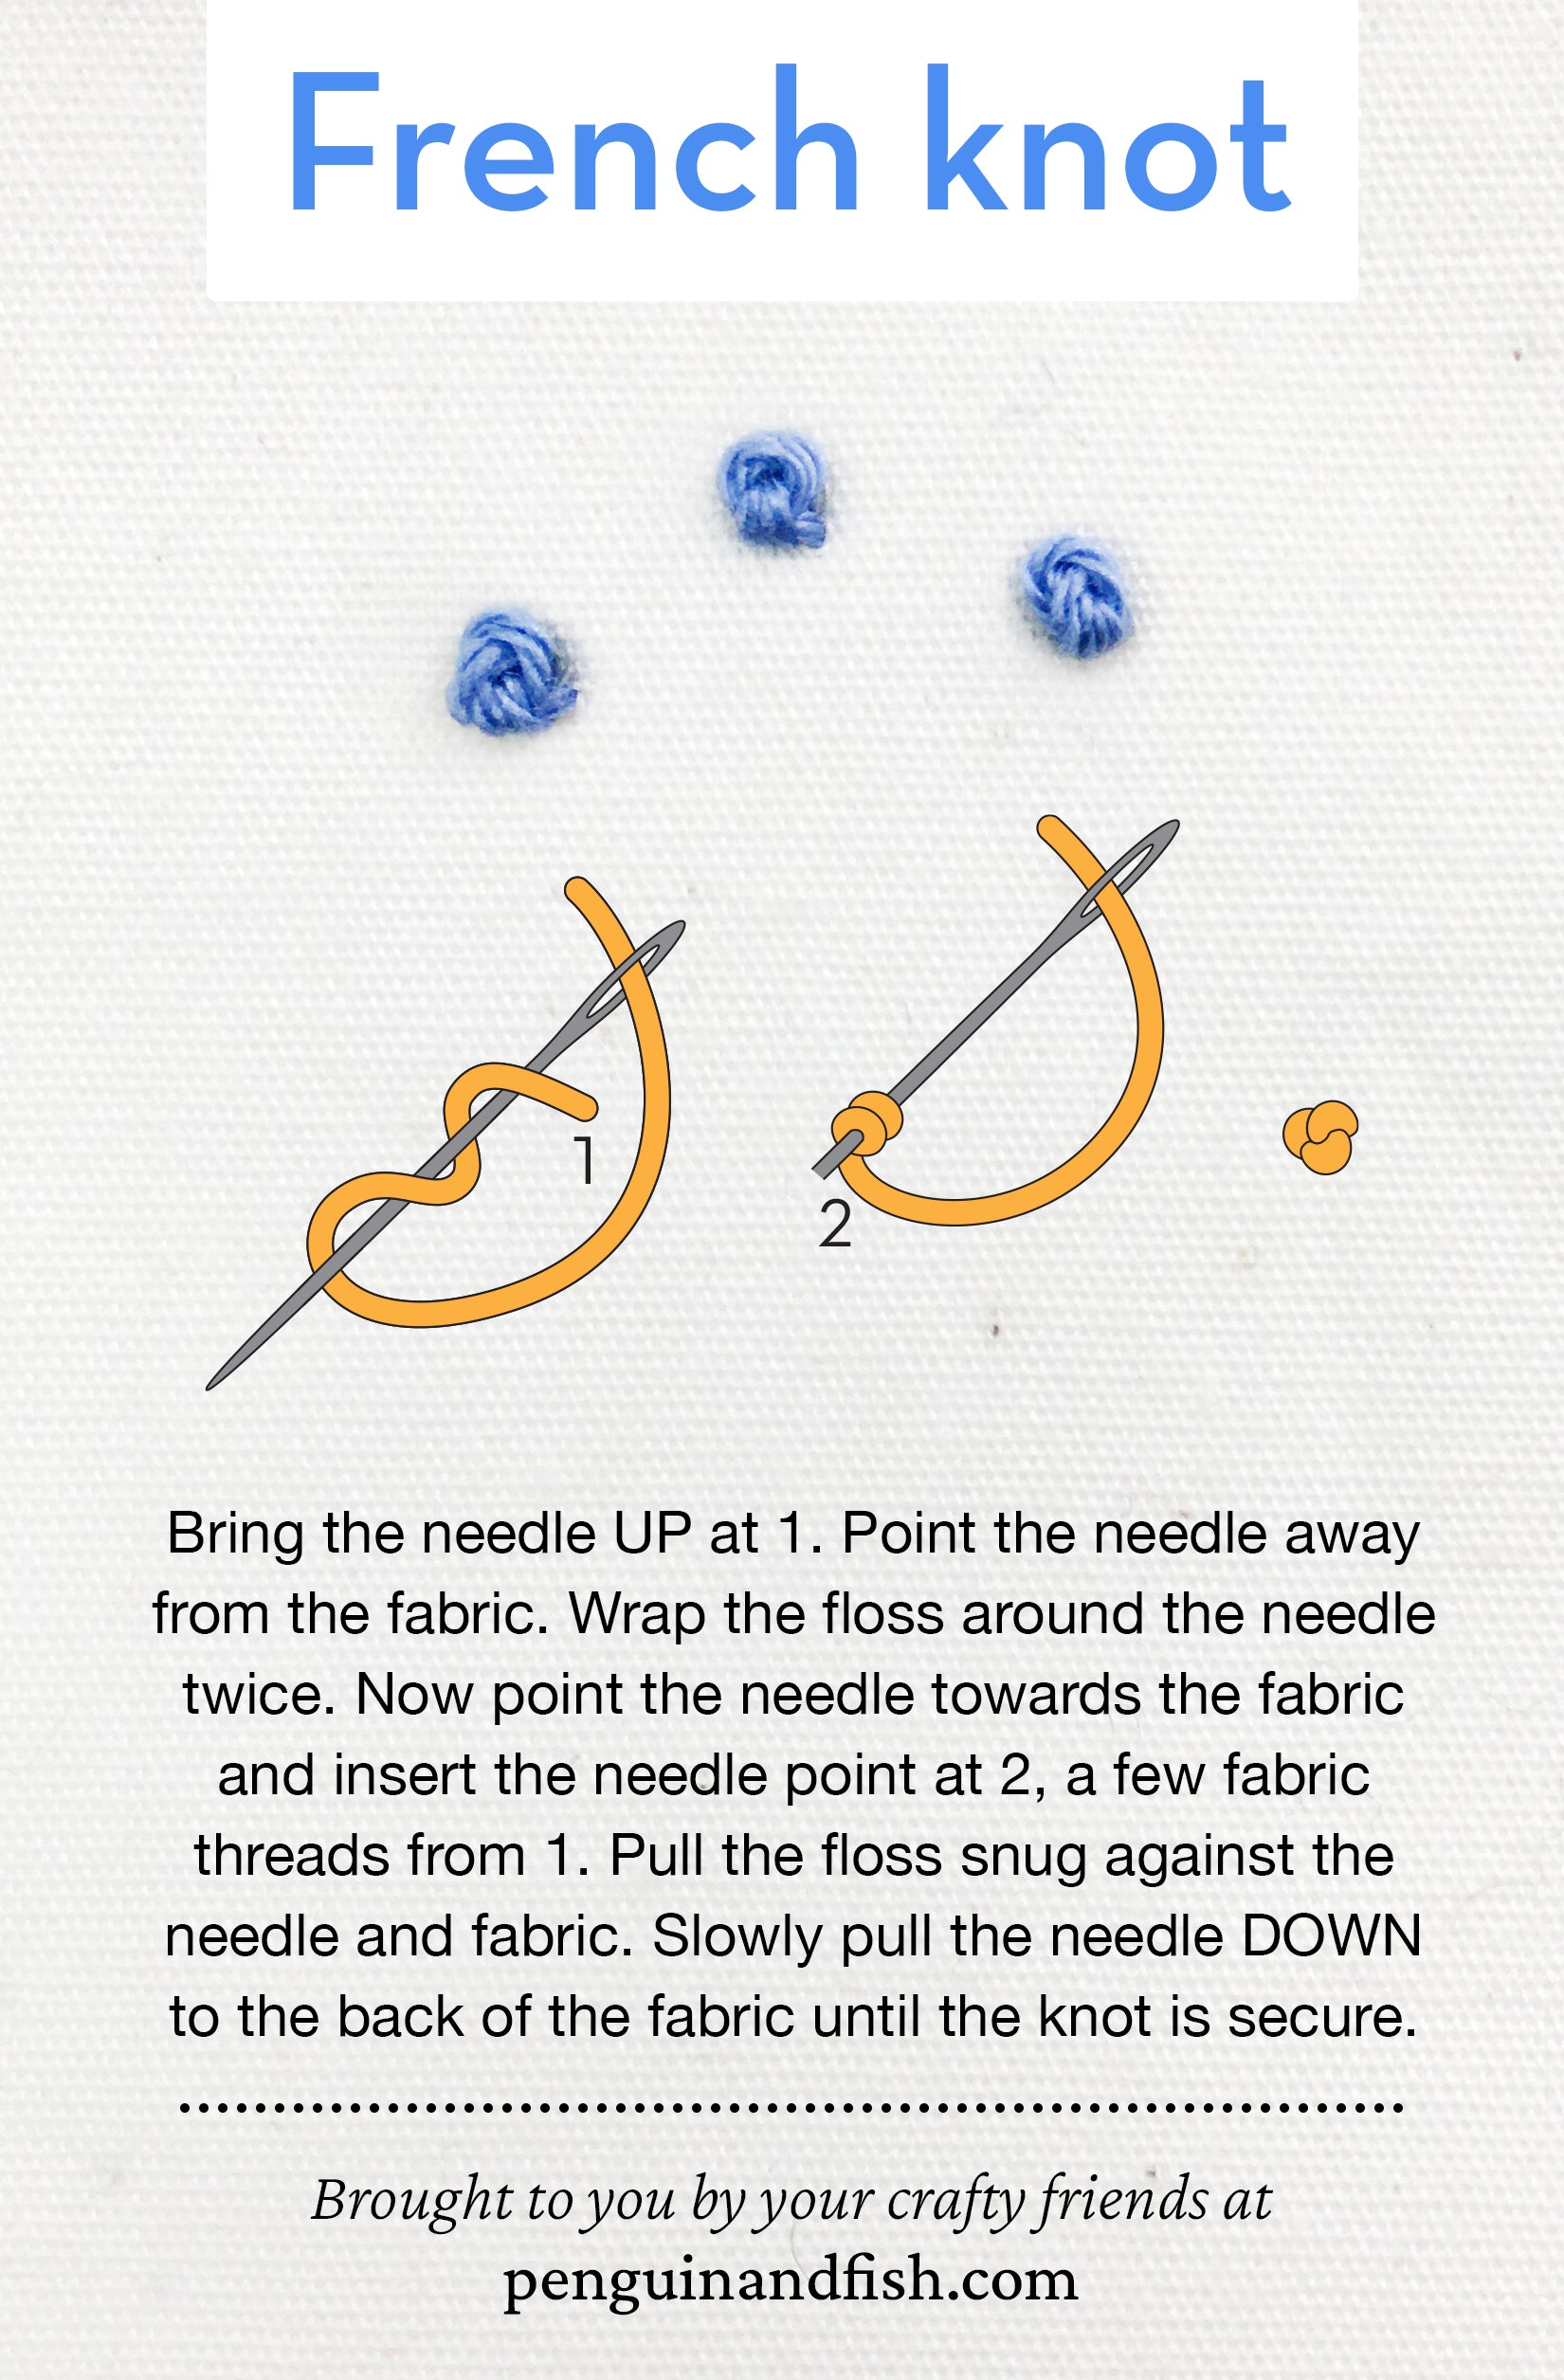 French knot stitch diagram for Pinterest